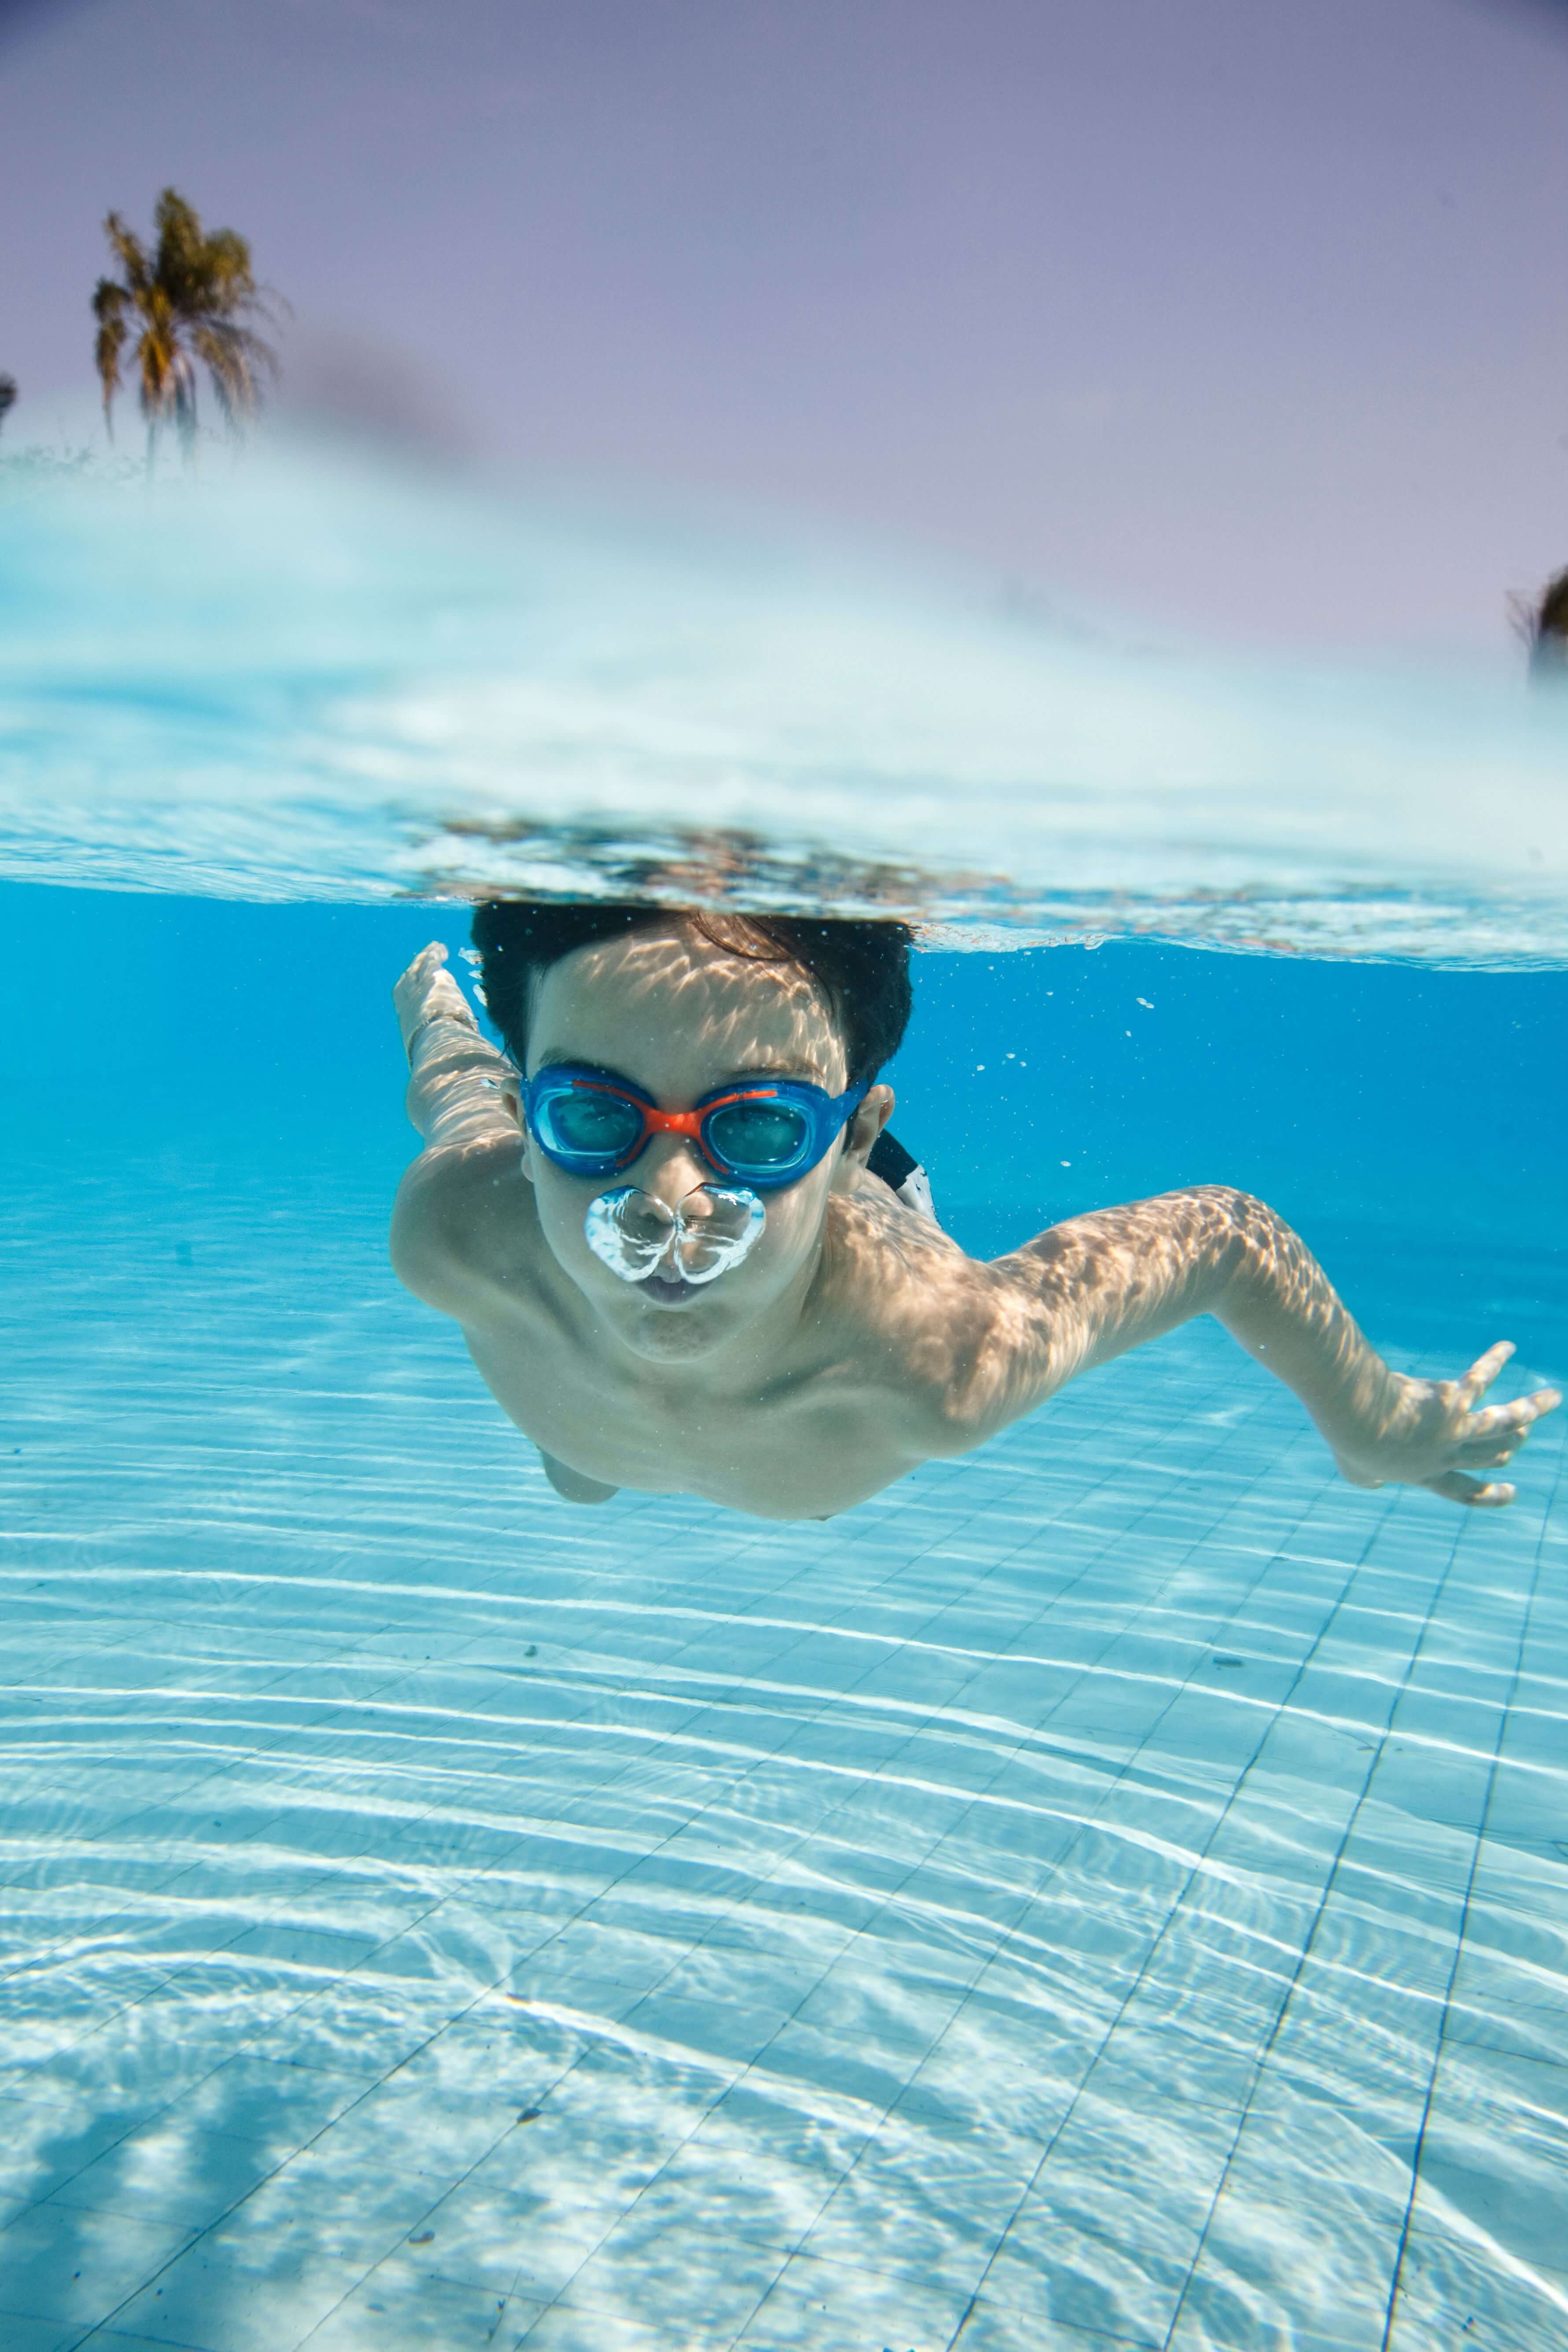 A child swimming under water